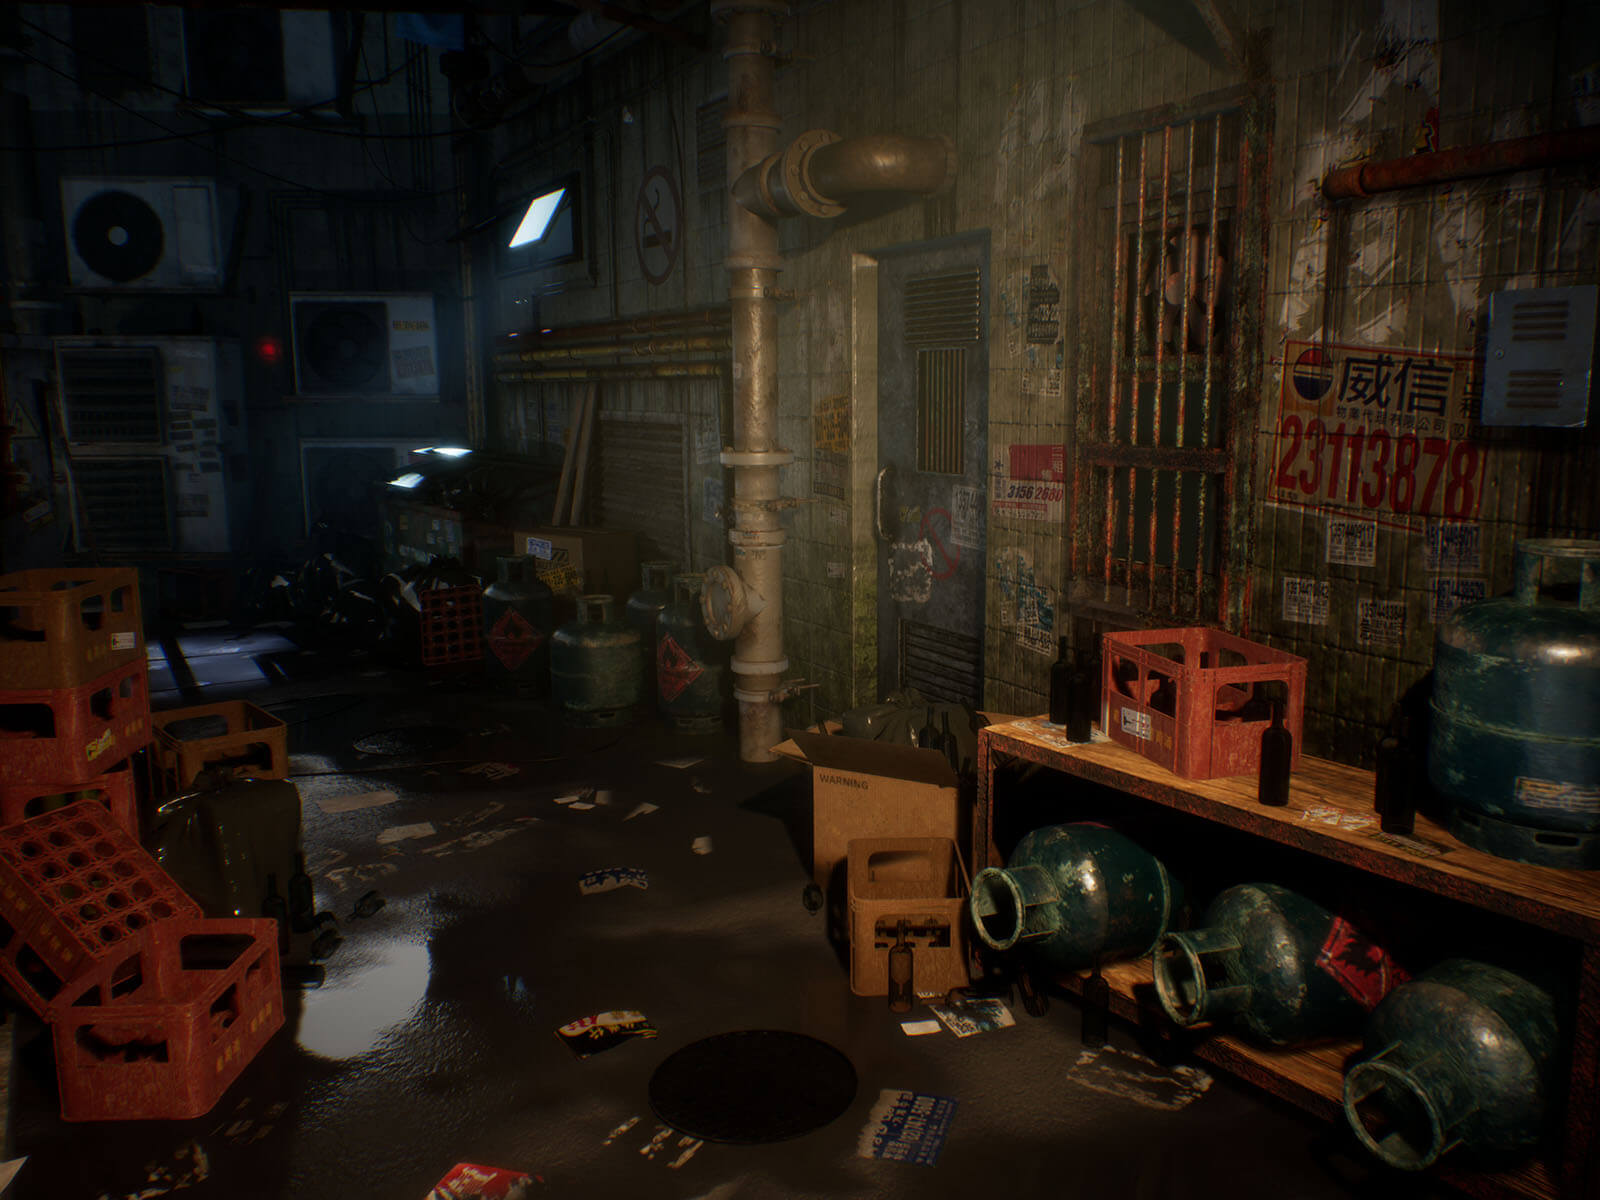 Gas tanks and crates strewn about a dimly lit alleyway.